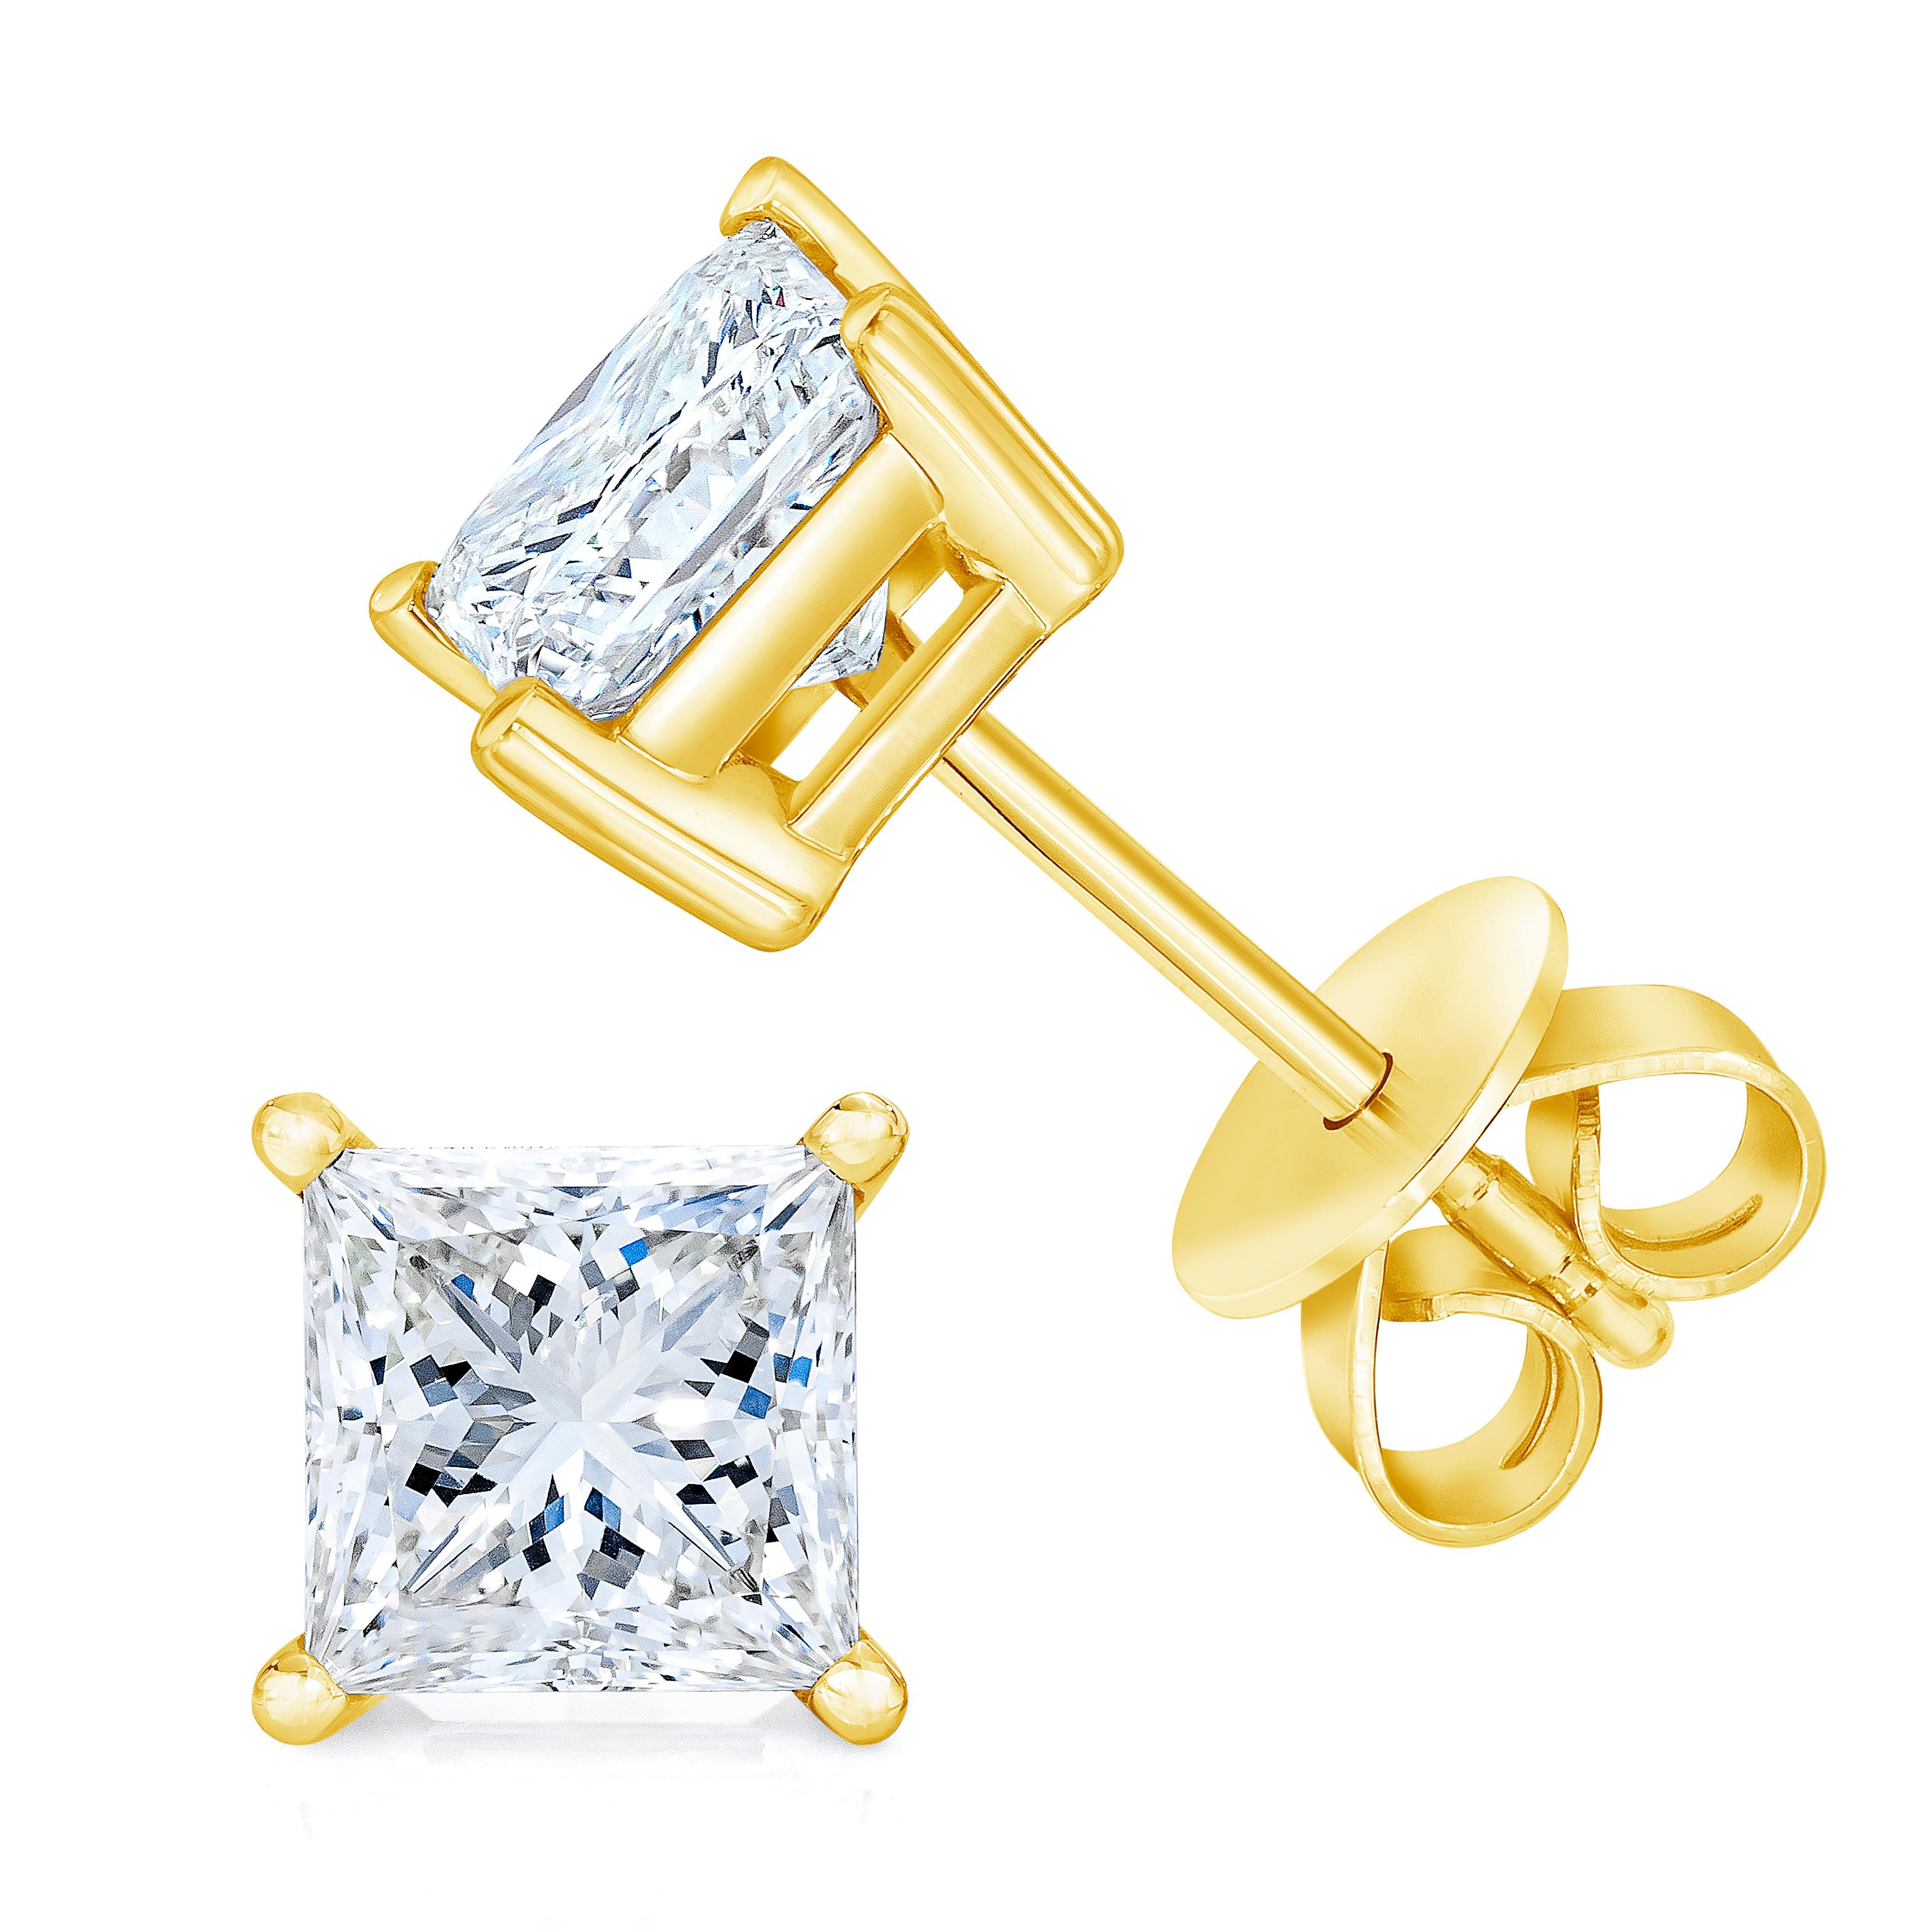 Celebrate any occasion with these classic shimmering diamond stud earrings. Fashioned in 14K gold, each earring showcases a sparkling square shaped, brilliant cut certified diamond solitaire. Dazzling with a bright polished shine, these post